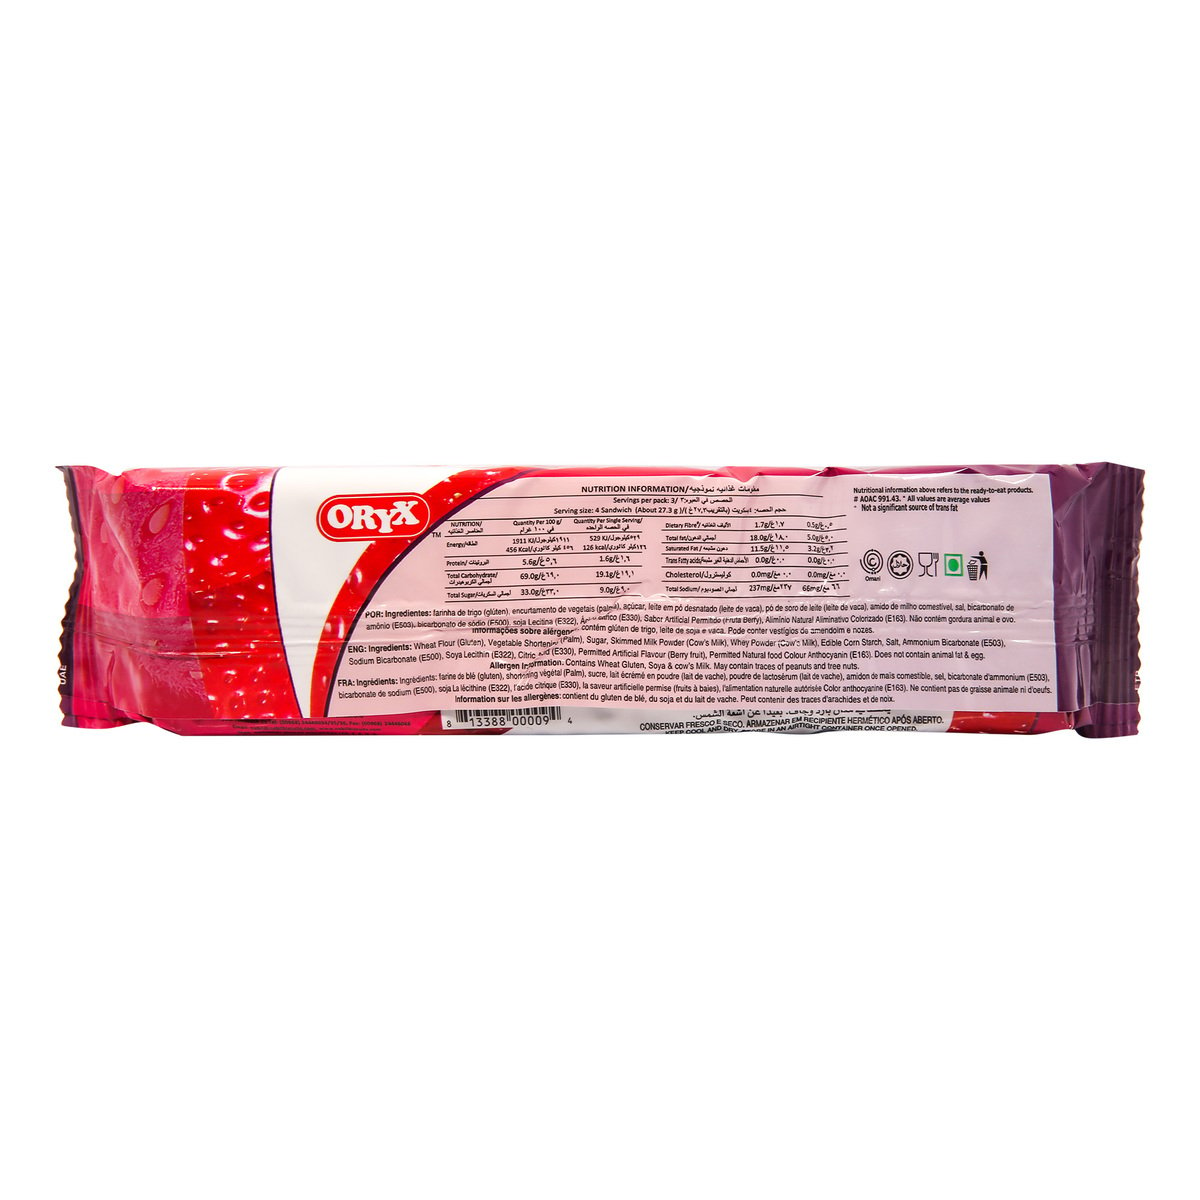 Oryx Cream Berry Fruits Biscuit 86g